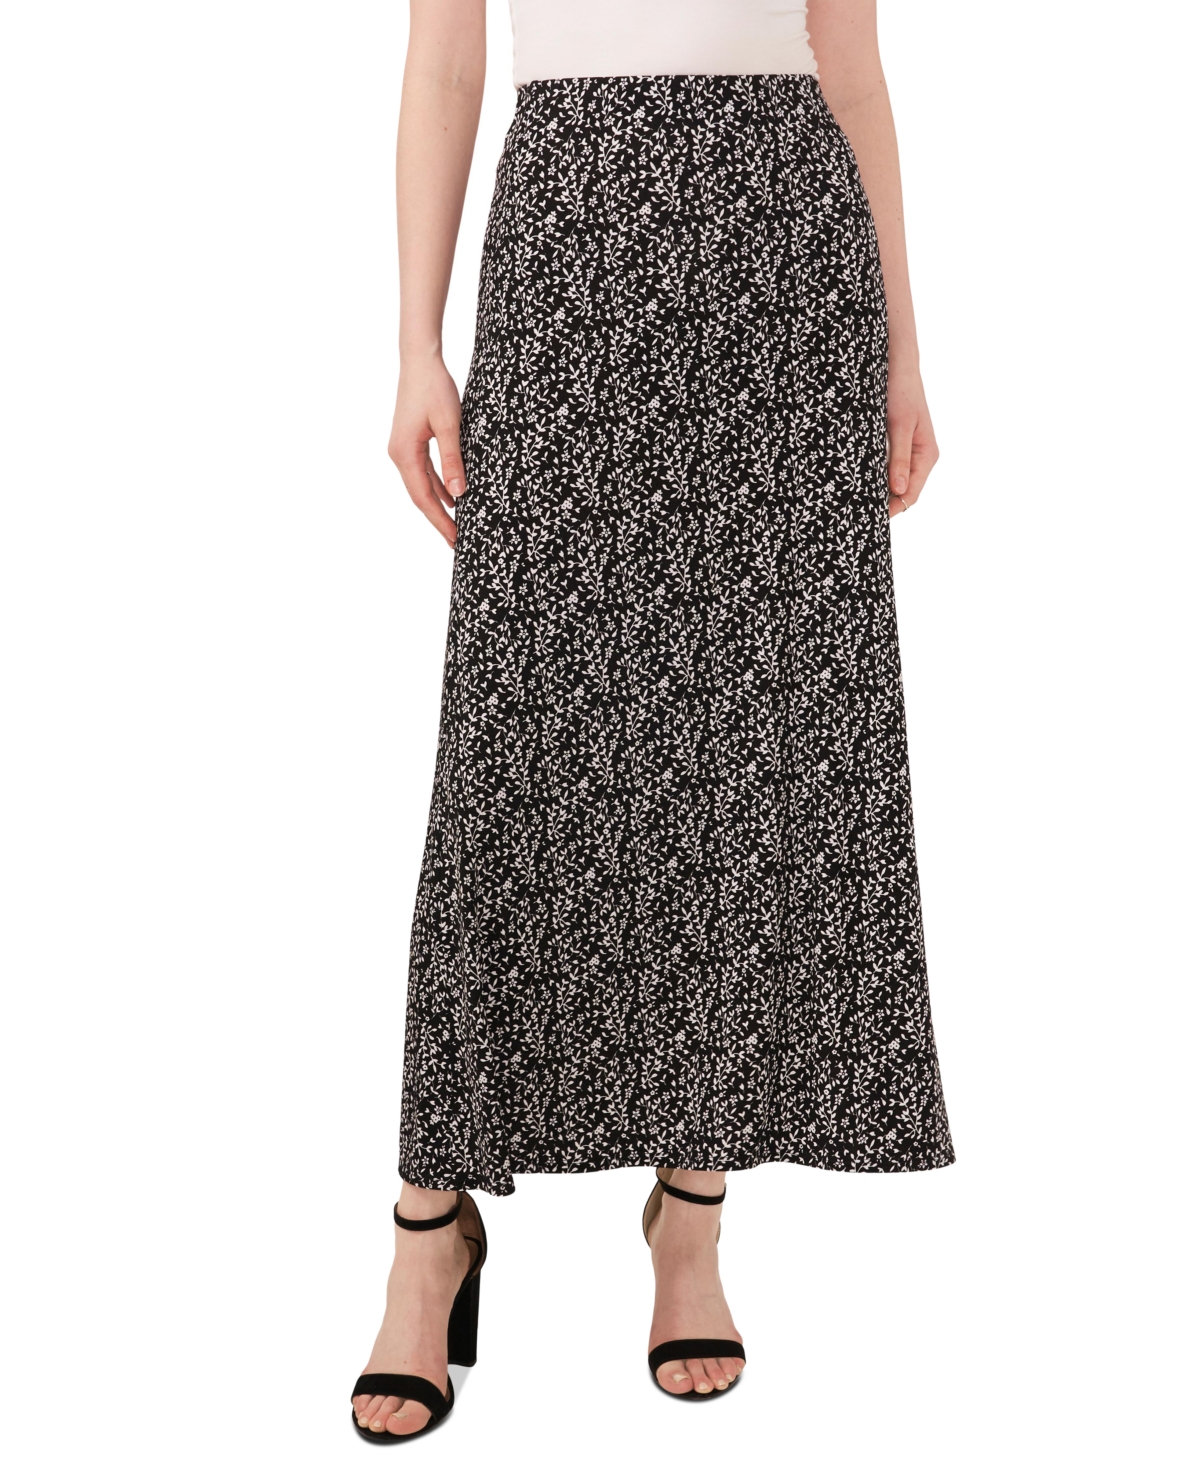 Women's Floral Pull-On Maxi Skirt - Rich Black